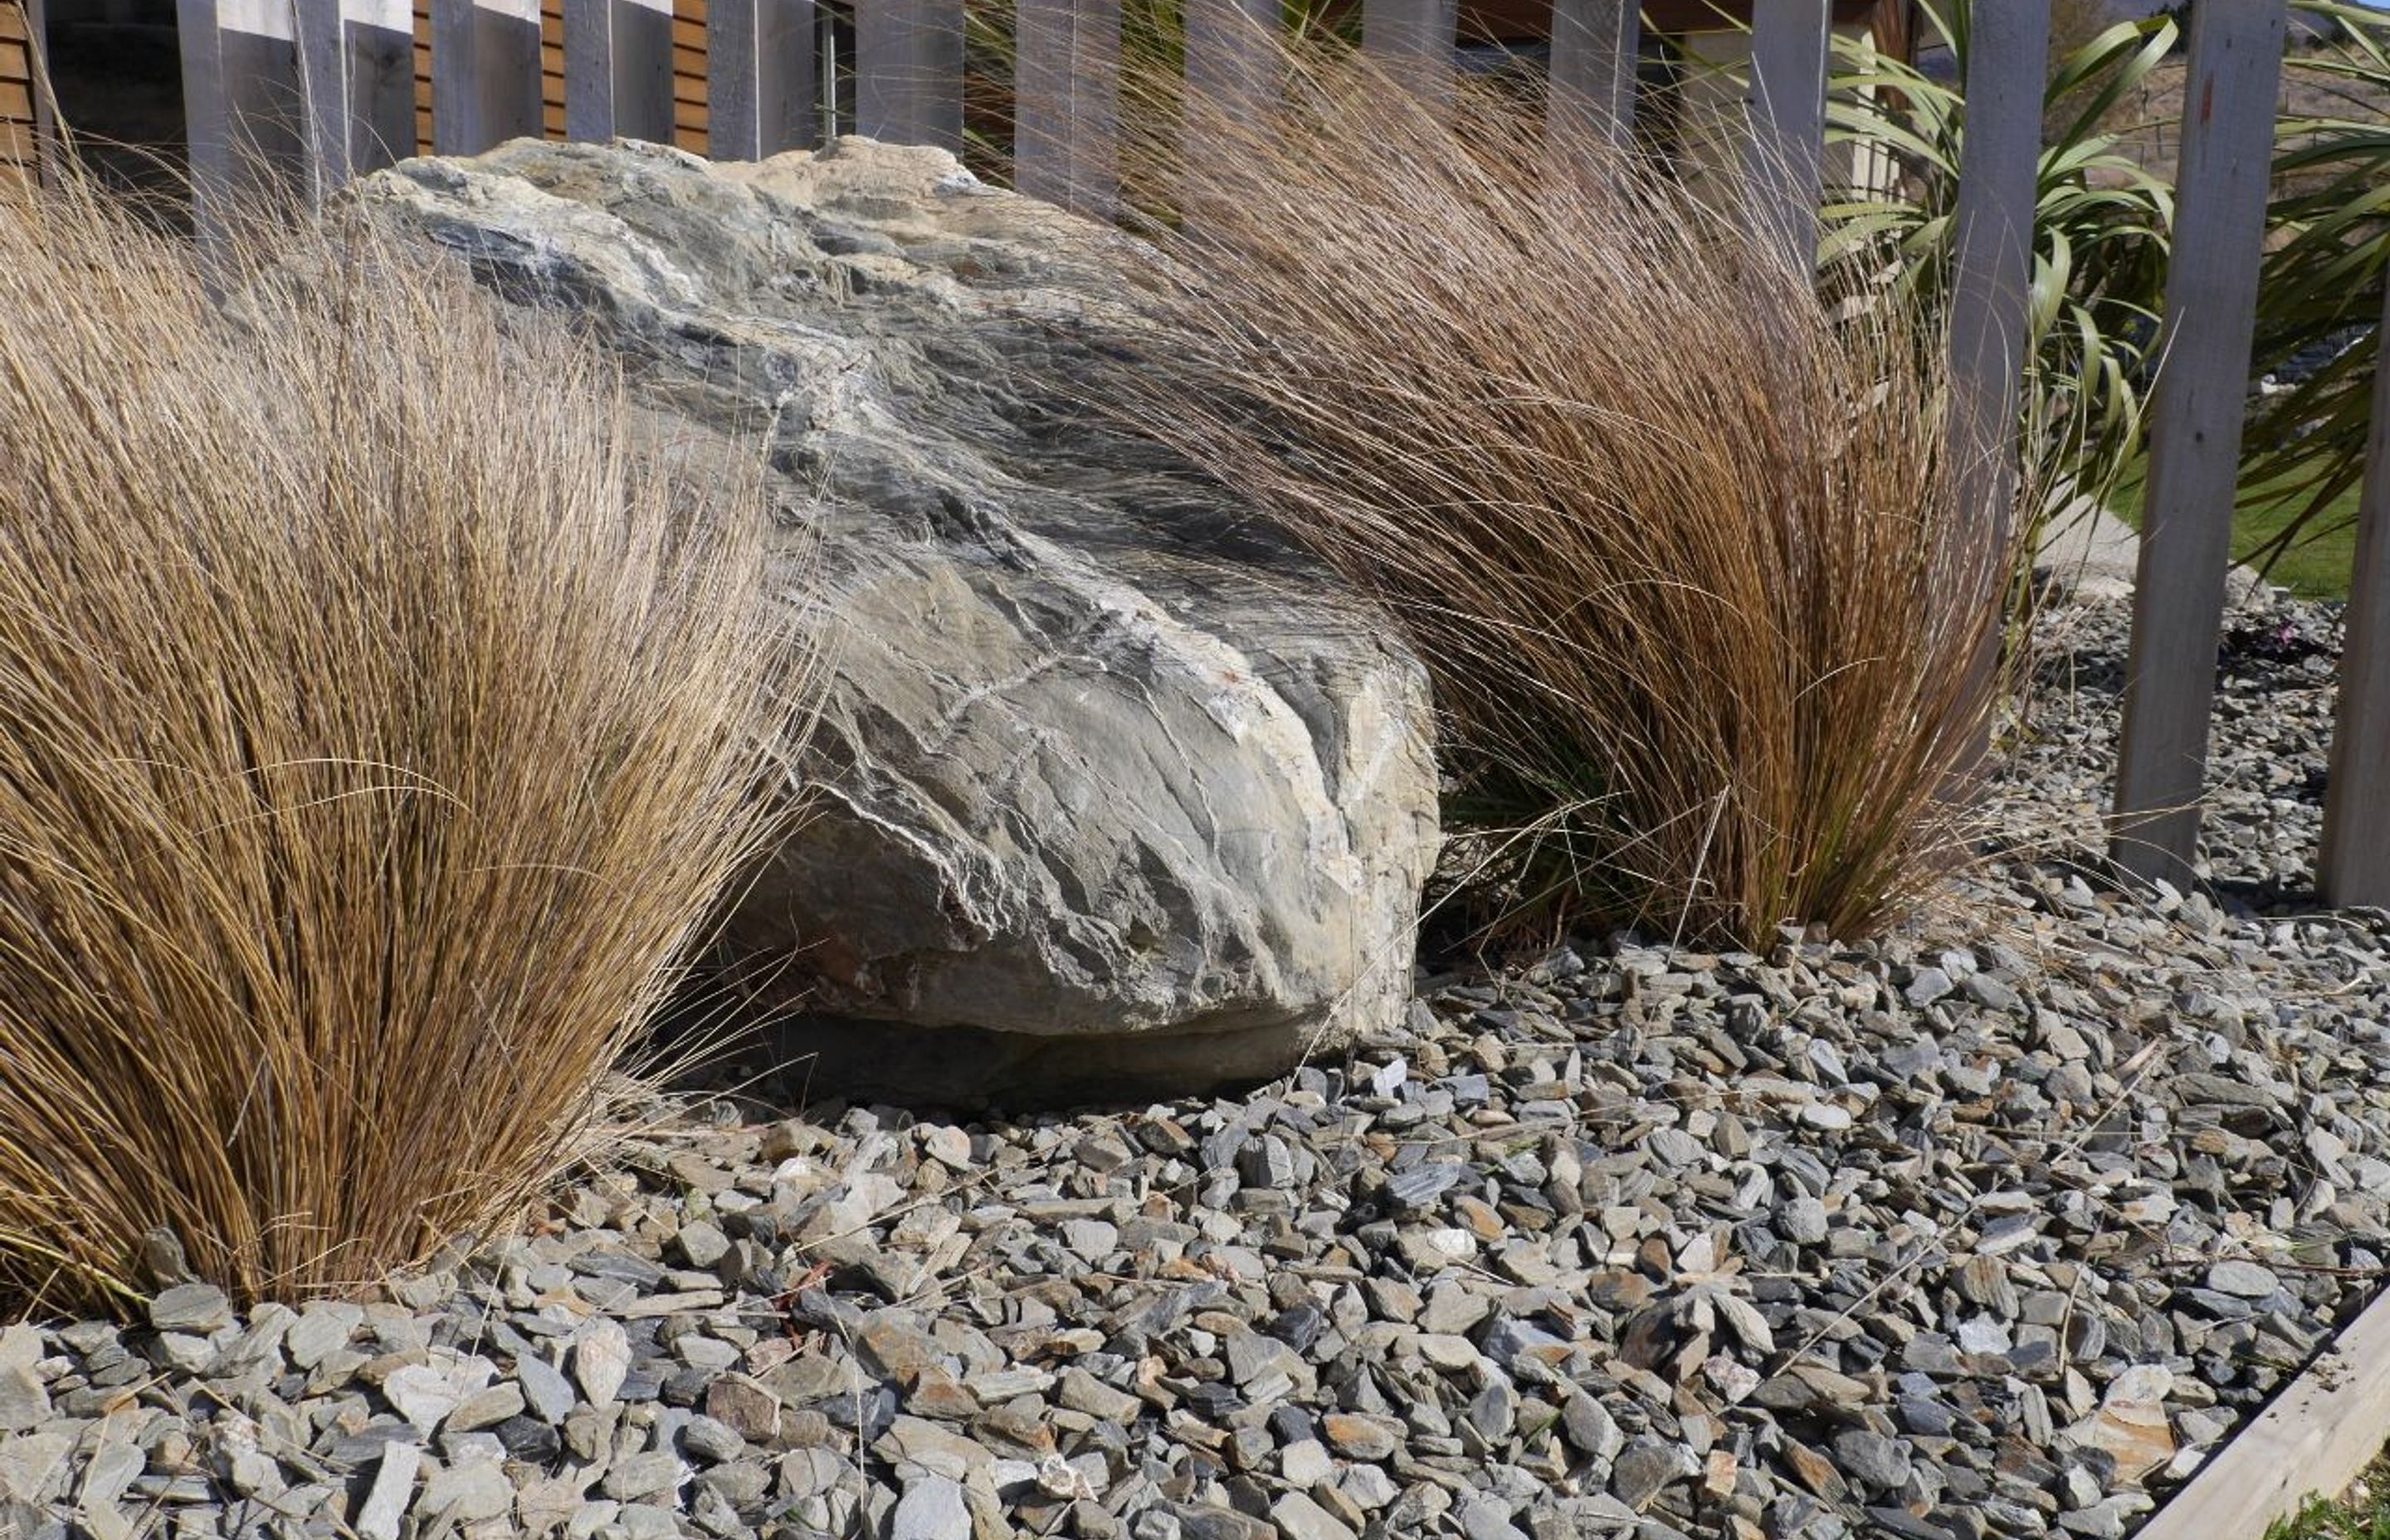 "We even crush our waste products – any stone offcuts that we can’t make into something – into decorative gravel to use every piece of stone in some way," says Lucy.